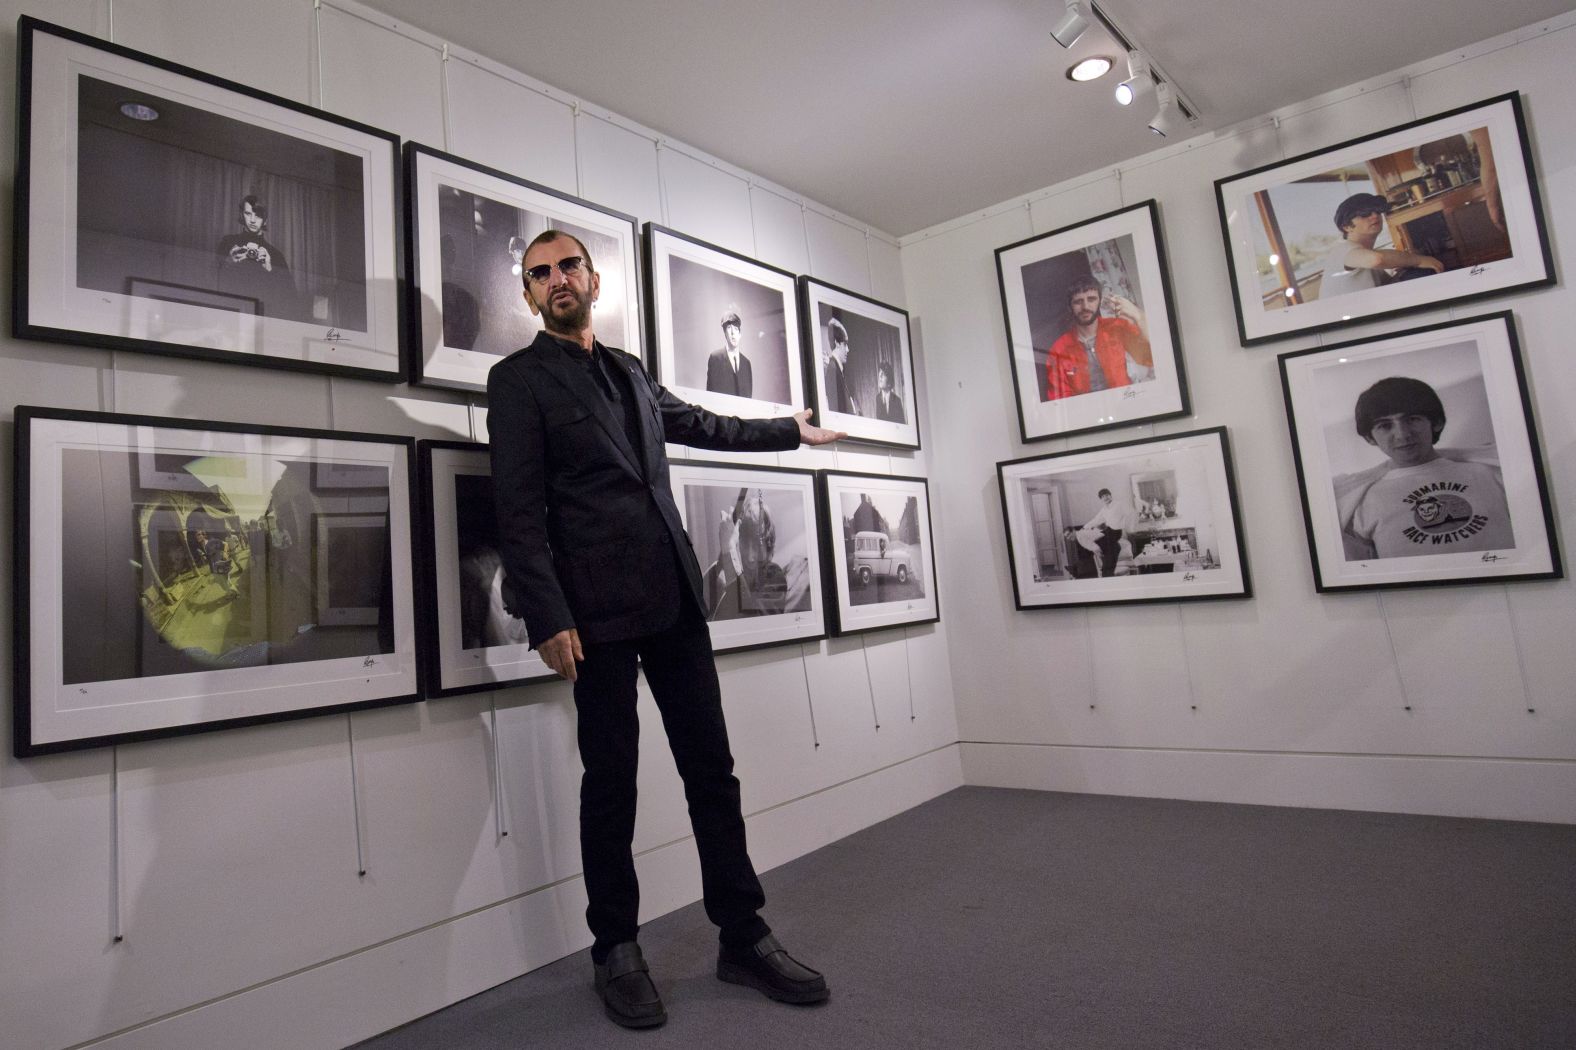 Starr attends a 2015 exhibition of photos he took during his life. He also put out a book, "Photographs."